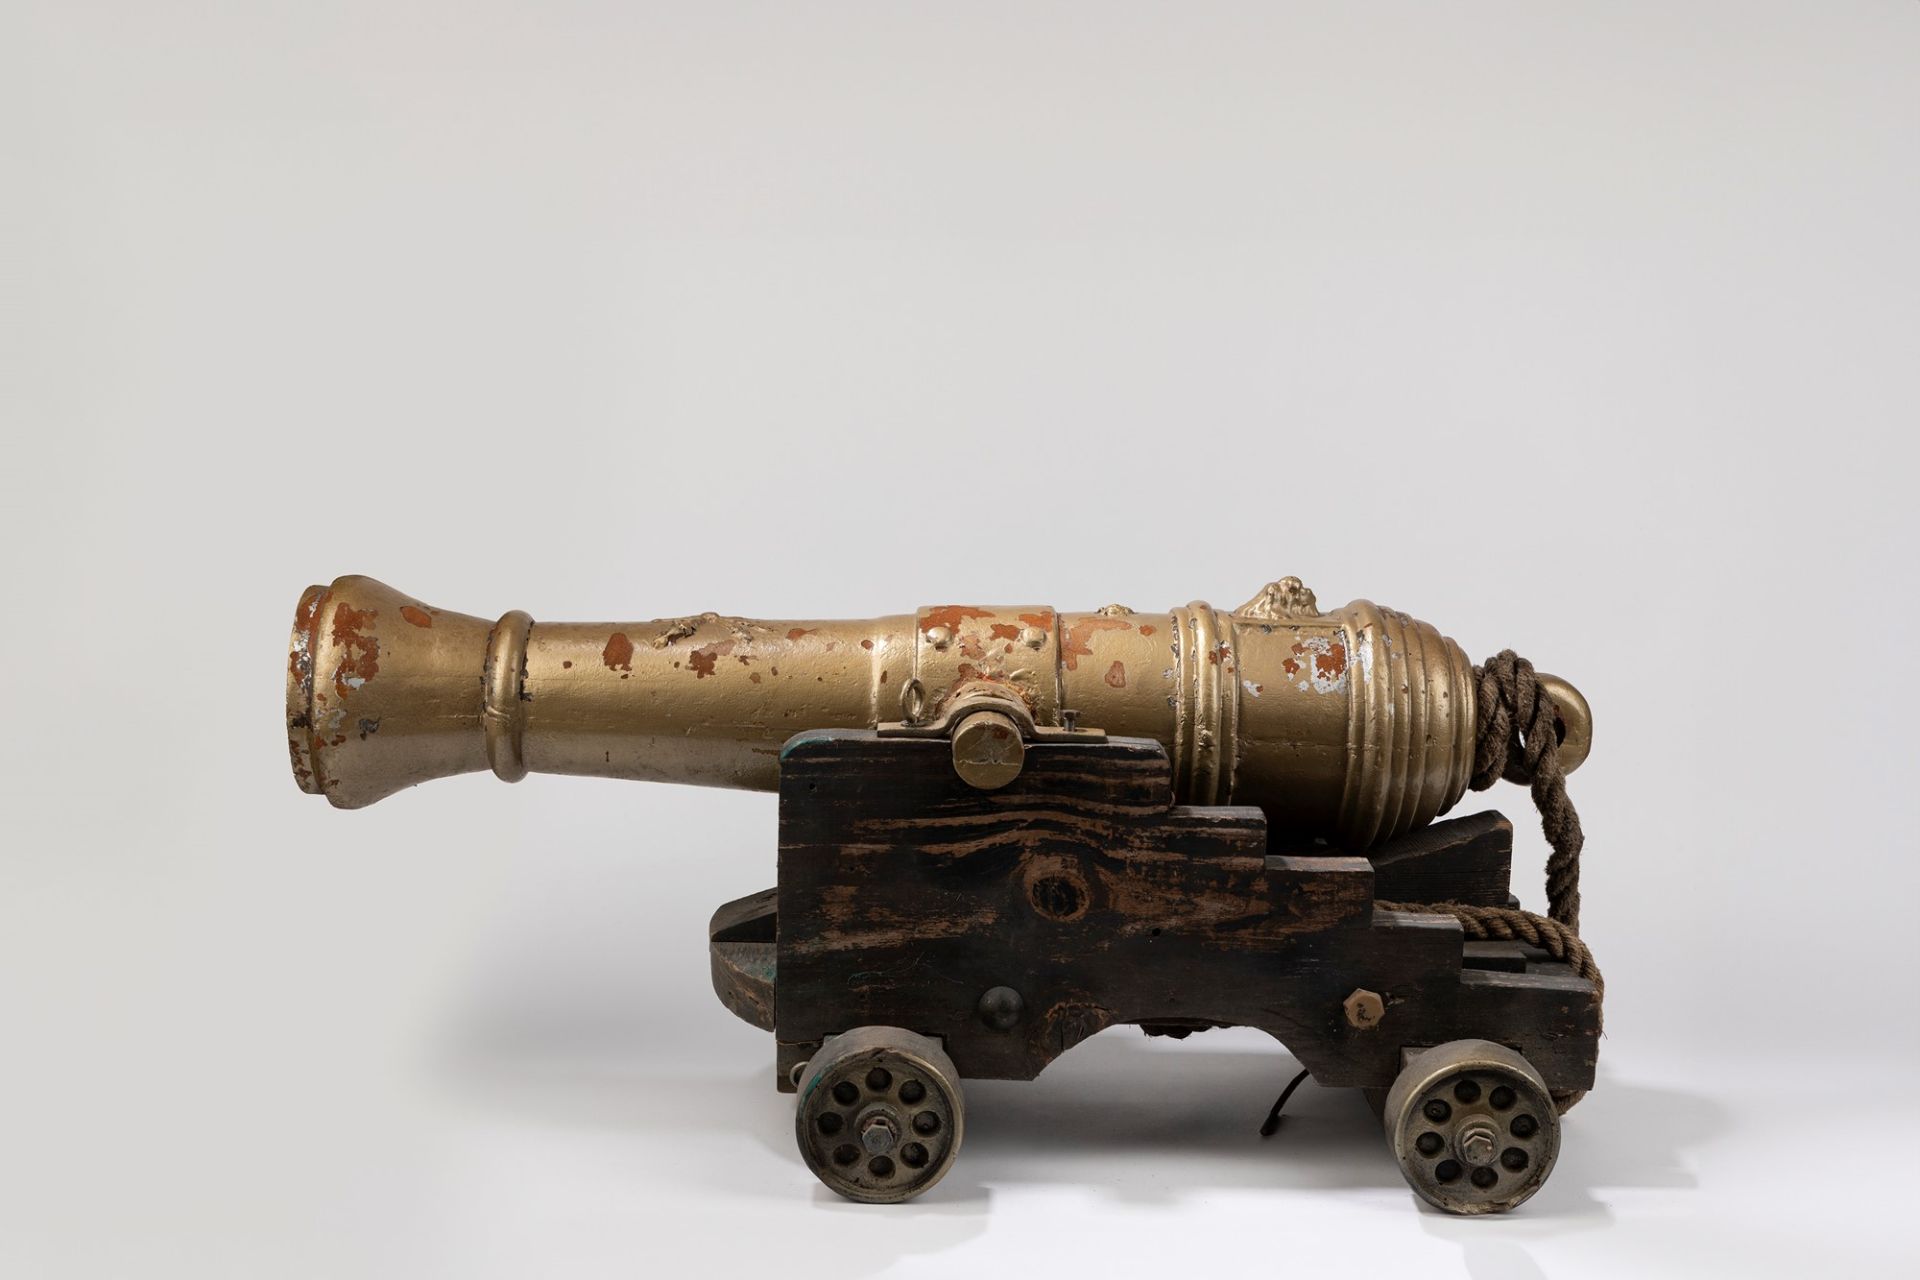 Wooden cannon, 1950-1960